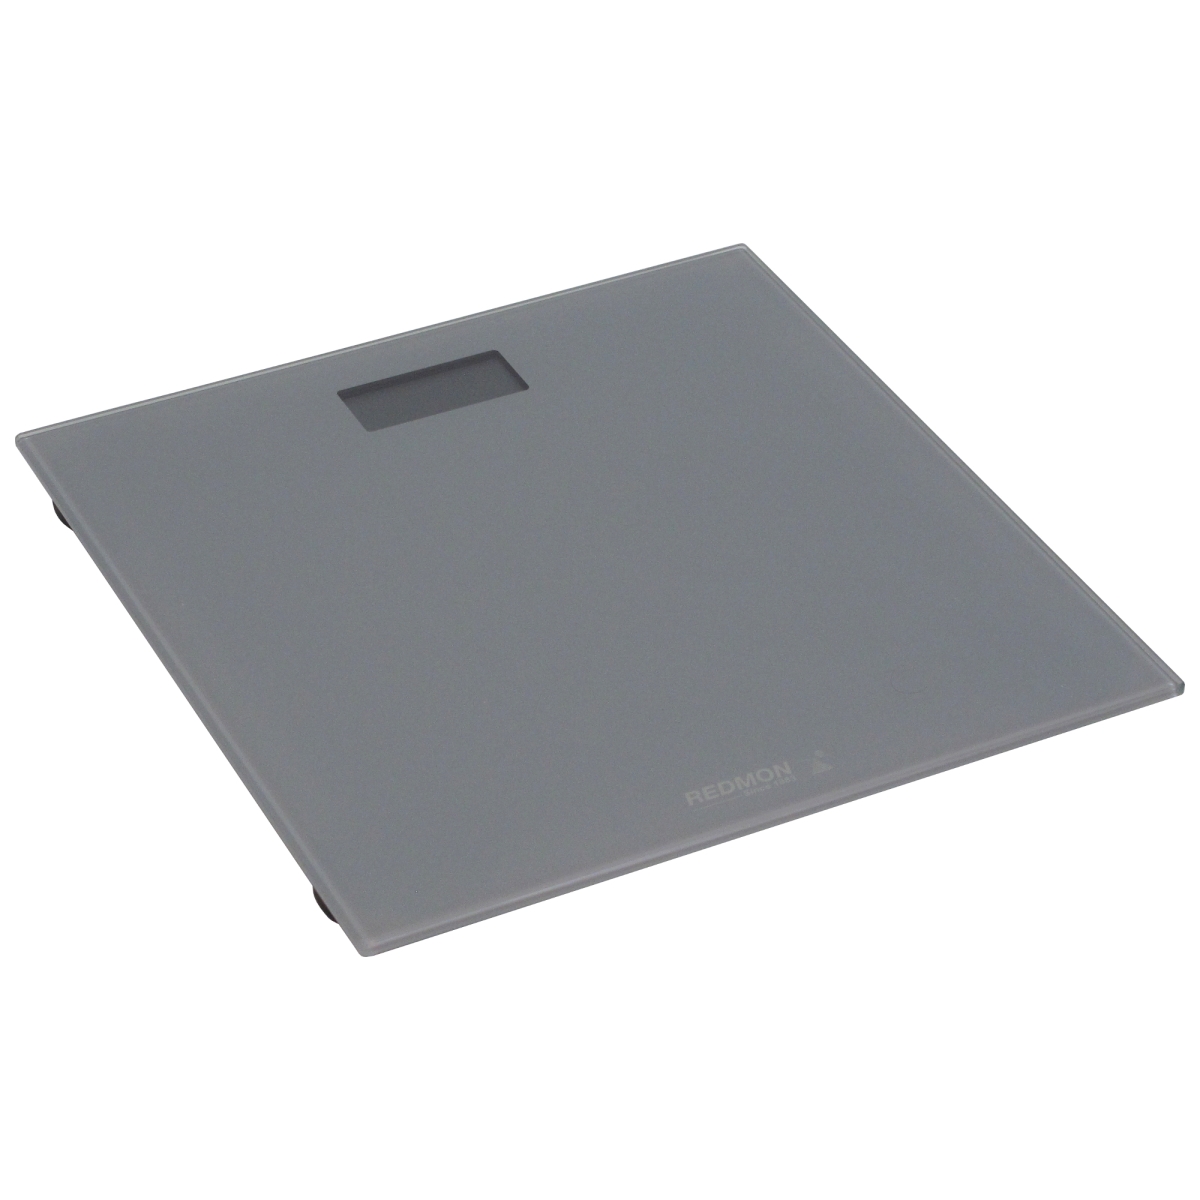 7451gy Precision Glass Personal Scale, Grey